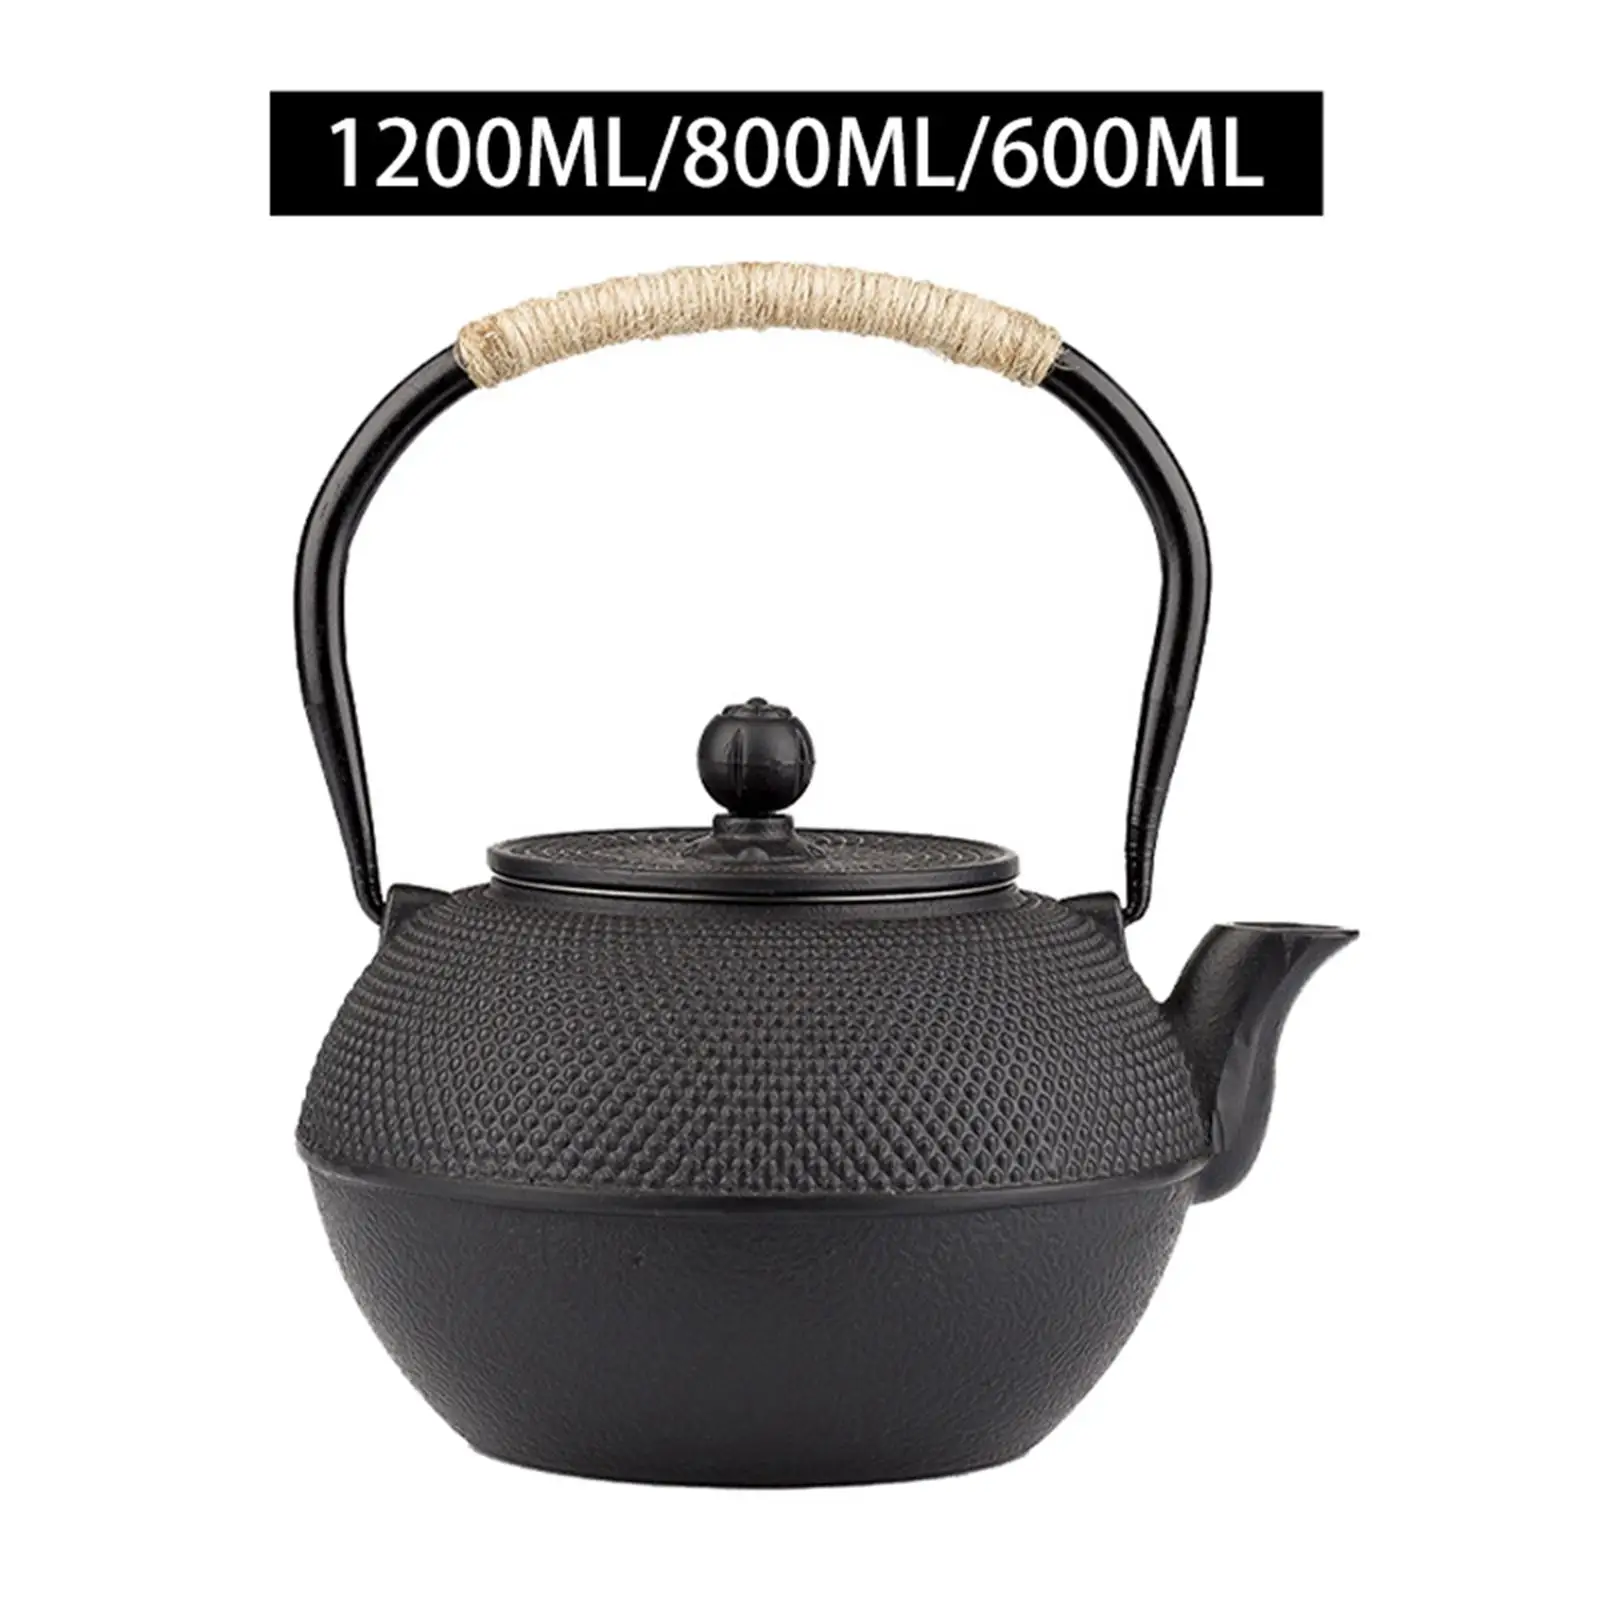 Cast Iron Teapot Tea Kettle for Parents Wood Stove Use ,Enameled Interior to Prevent Rust Pearl Embossing Pattern